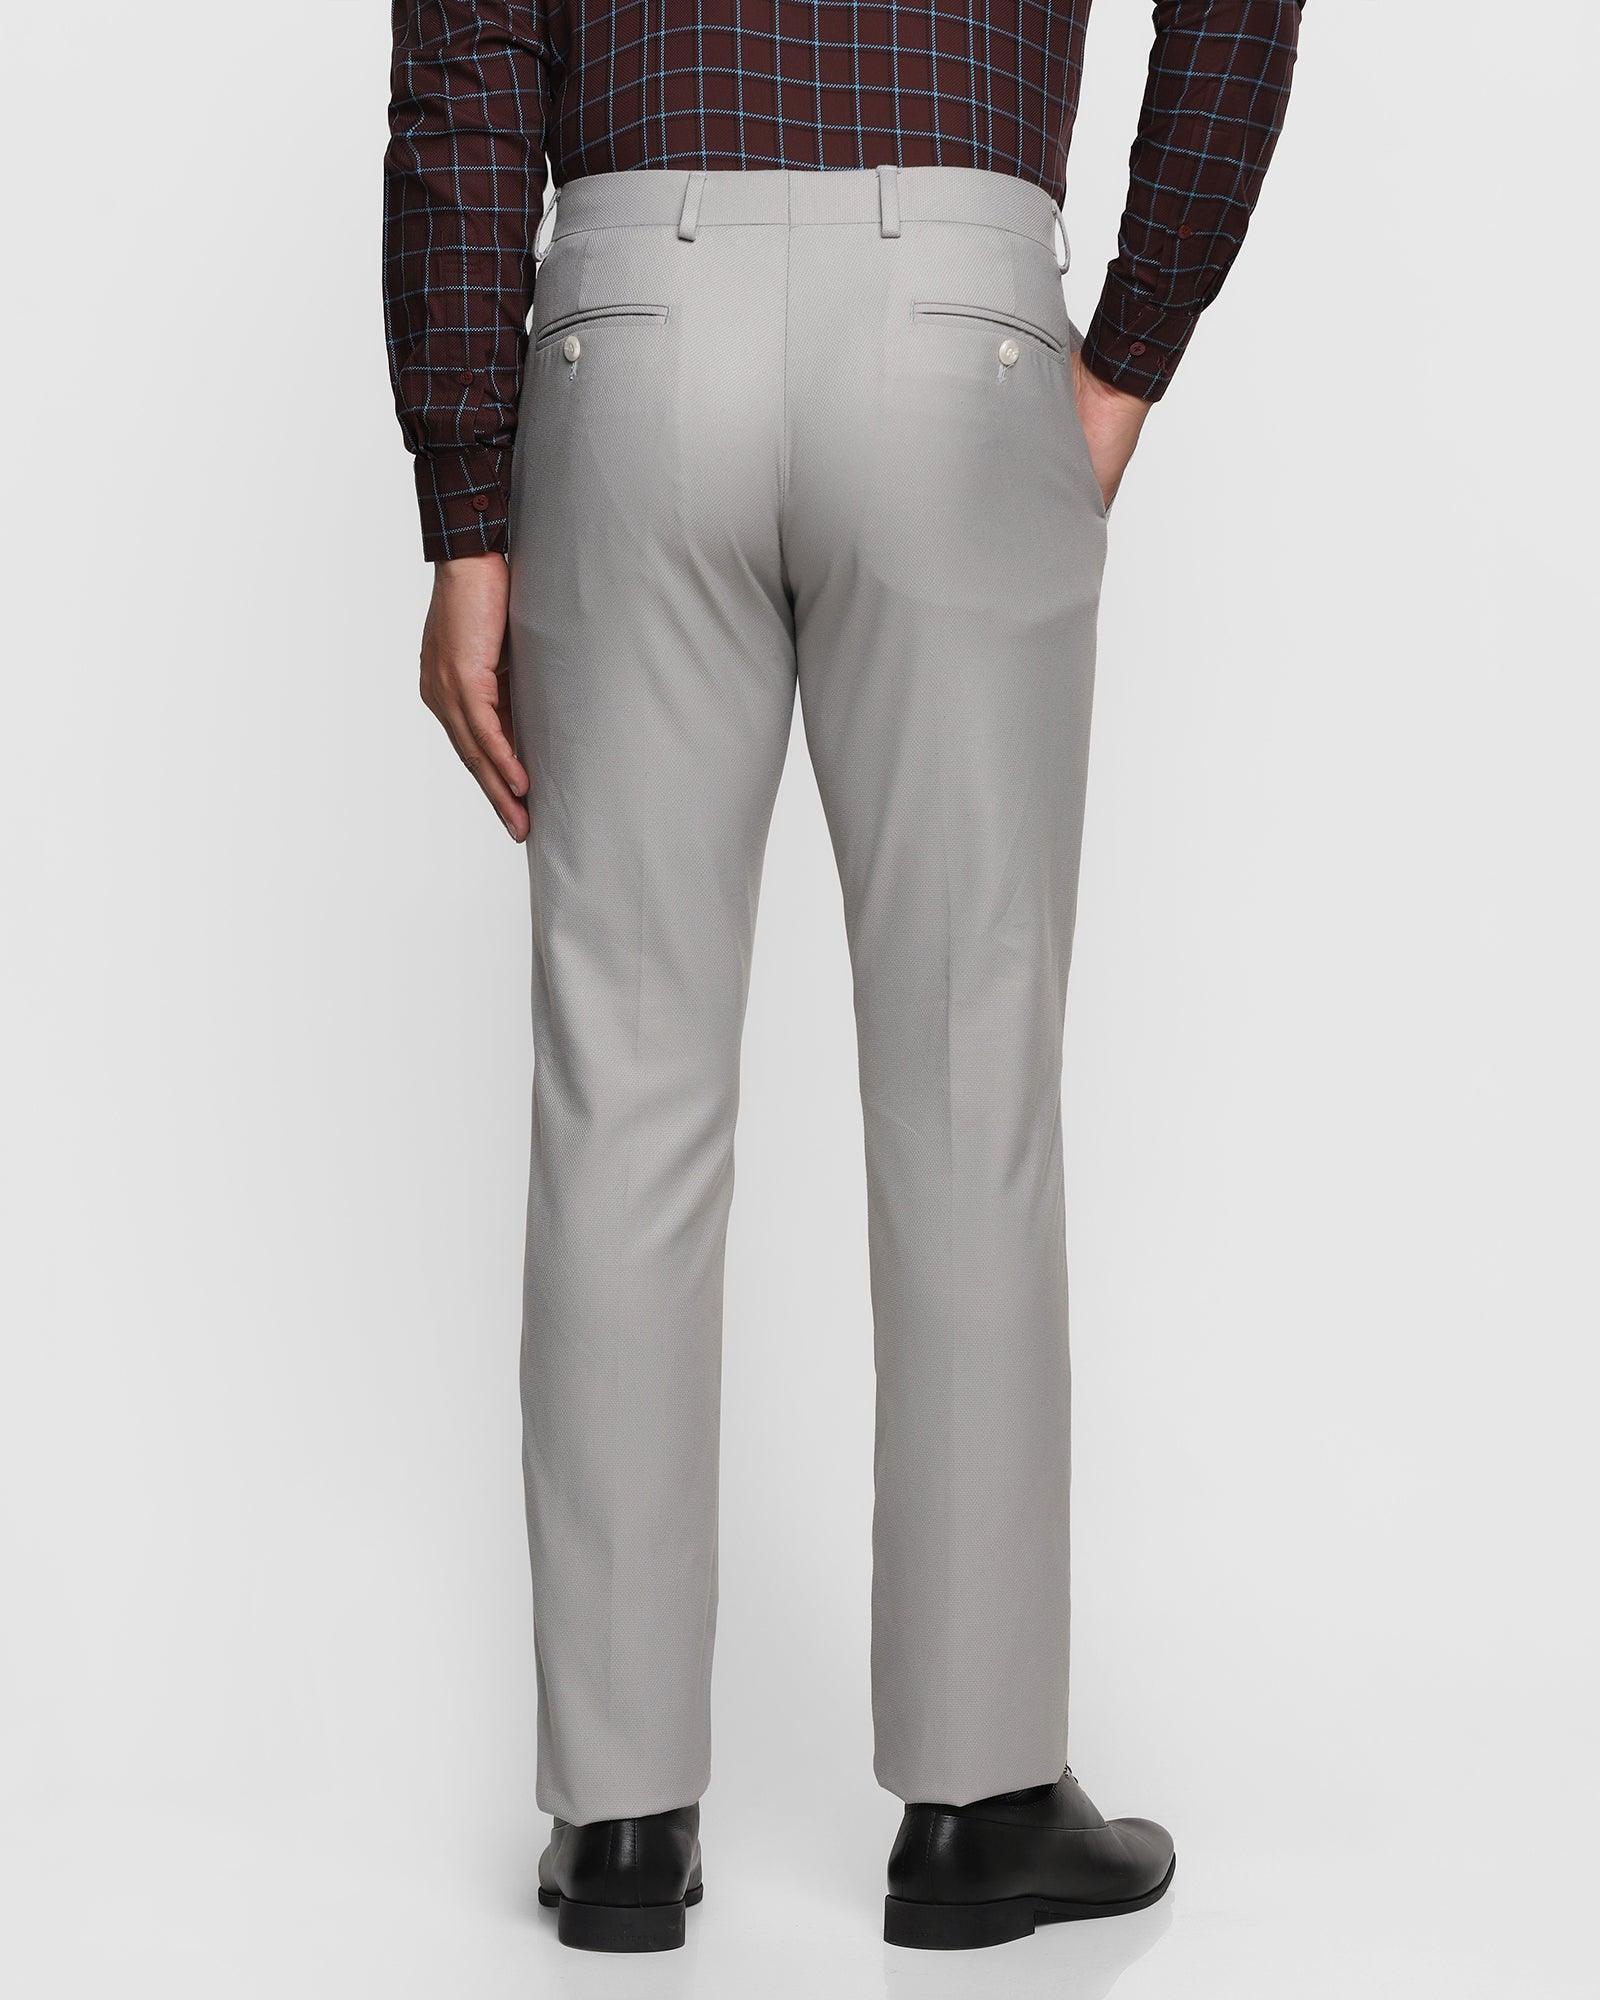 Slim Fit B-91 Formal Grey Textured Trouser - Ness